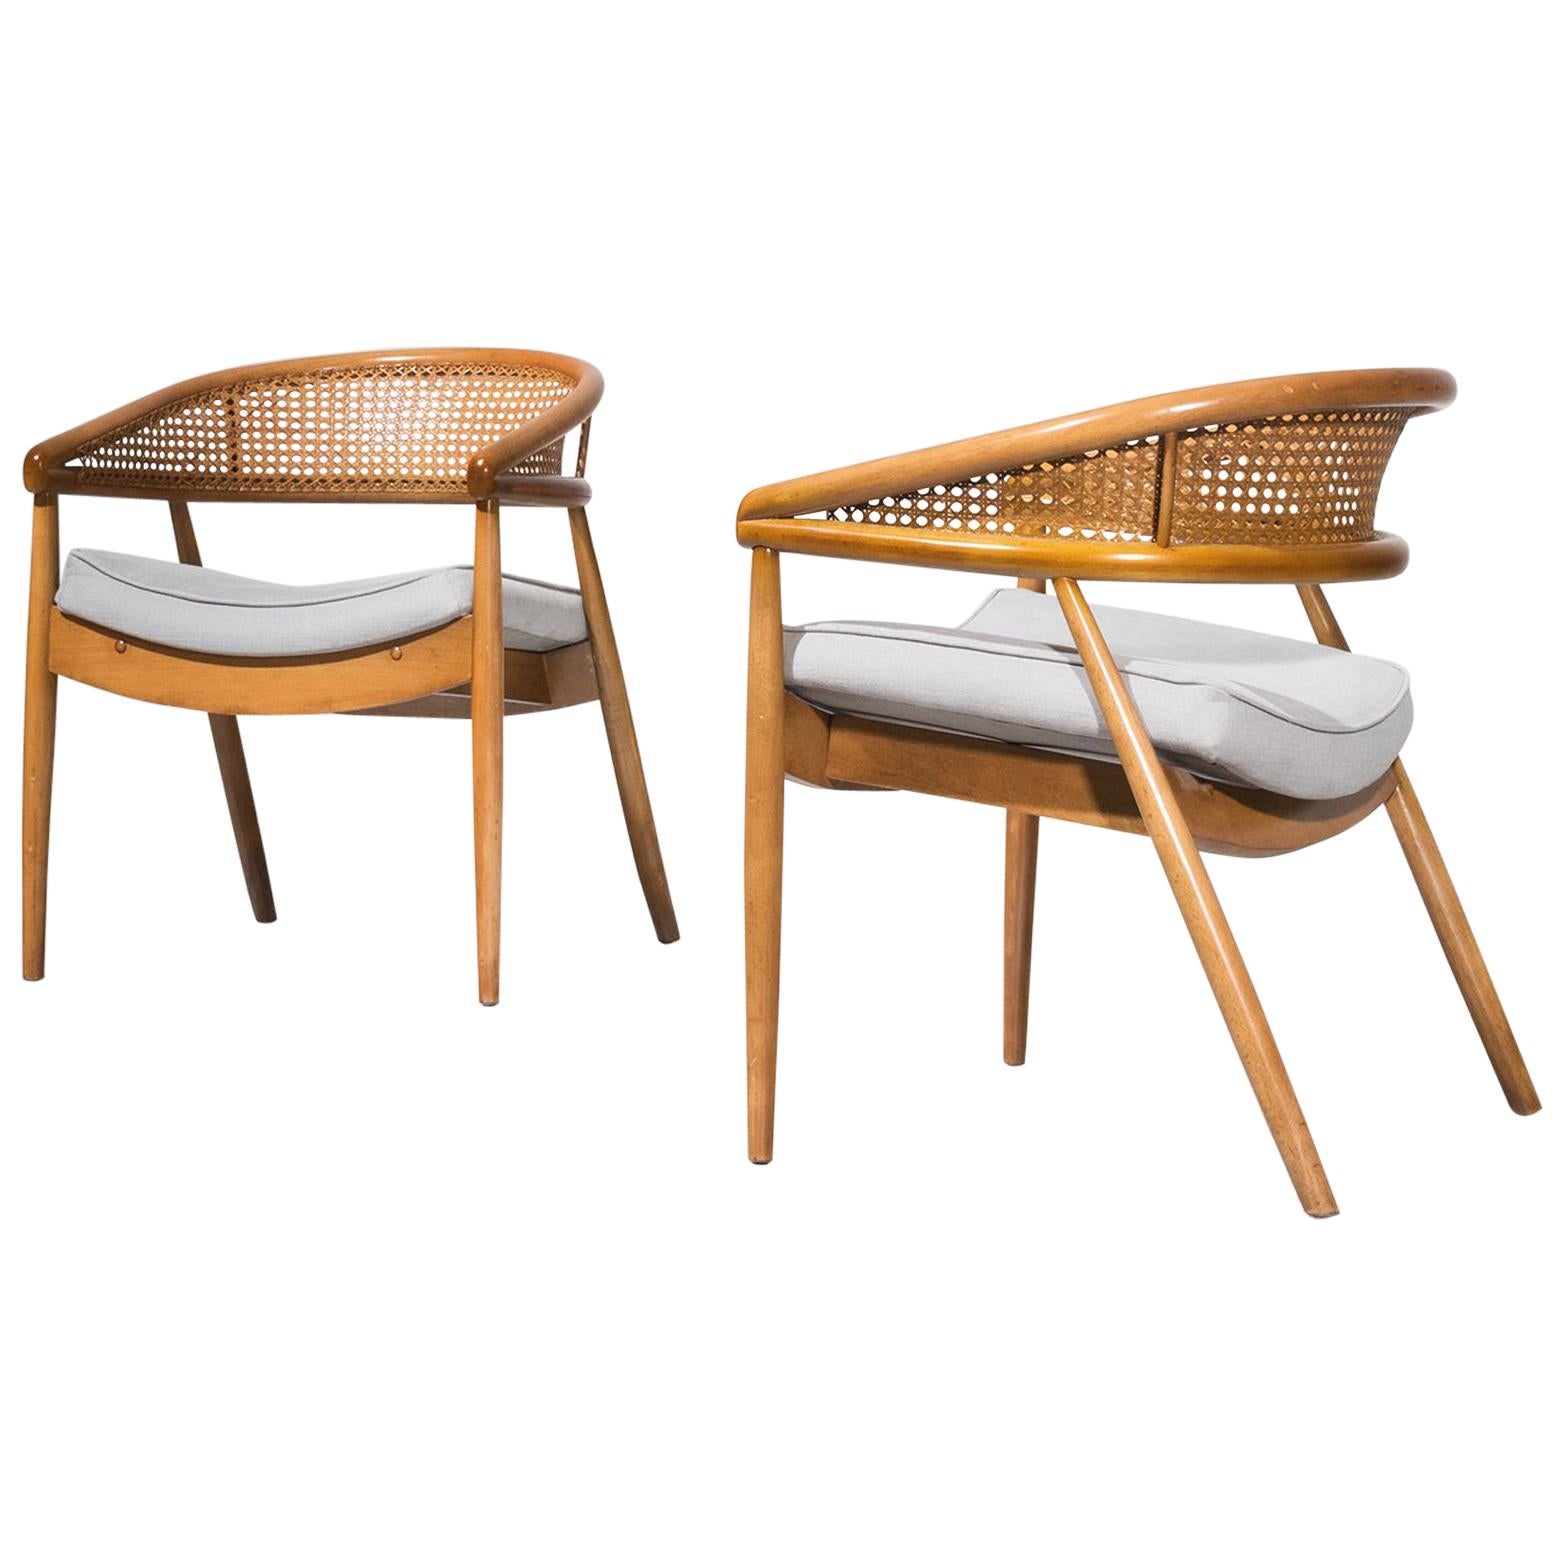 Pair of beech and cane James Mont "King Cole" Armchairs, 1950s